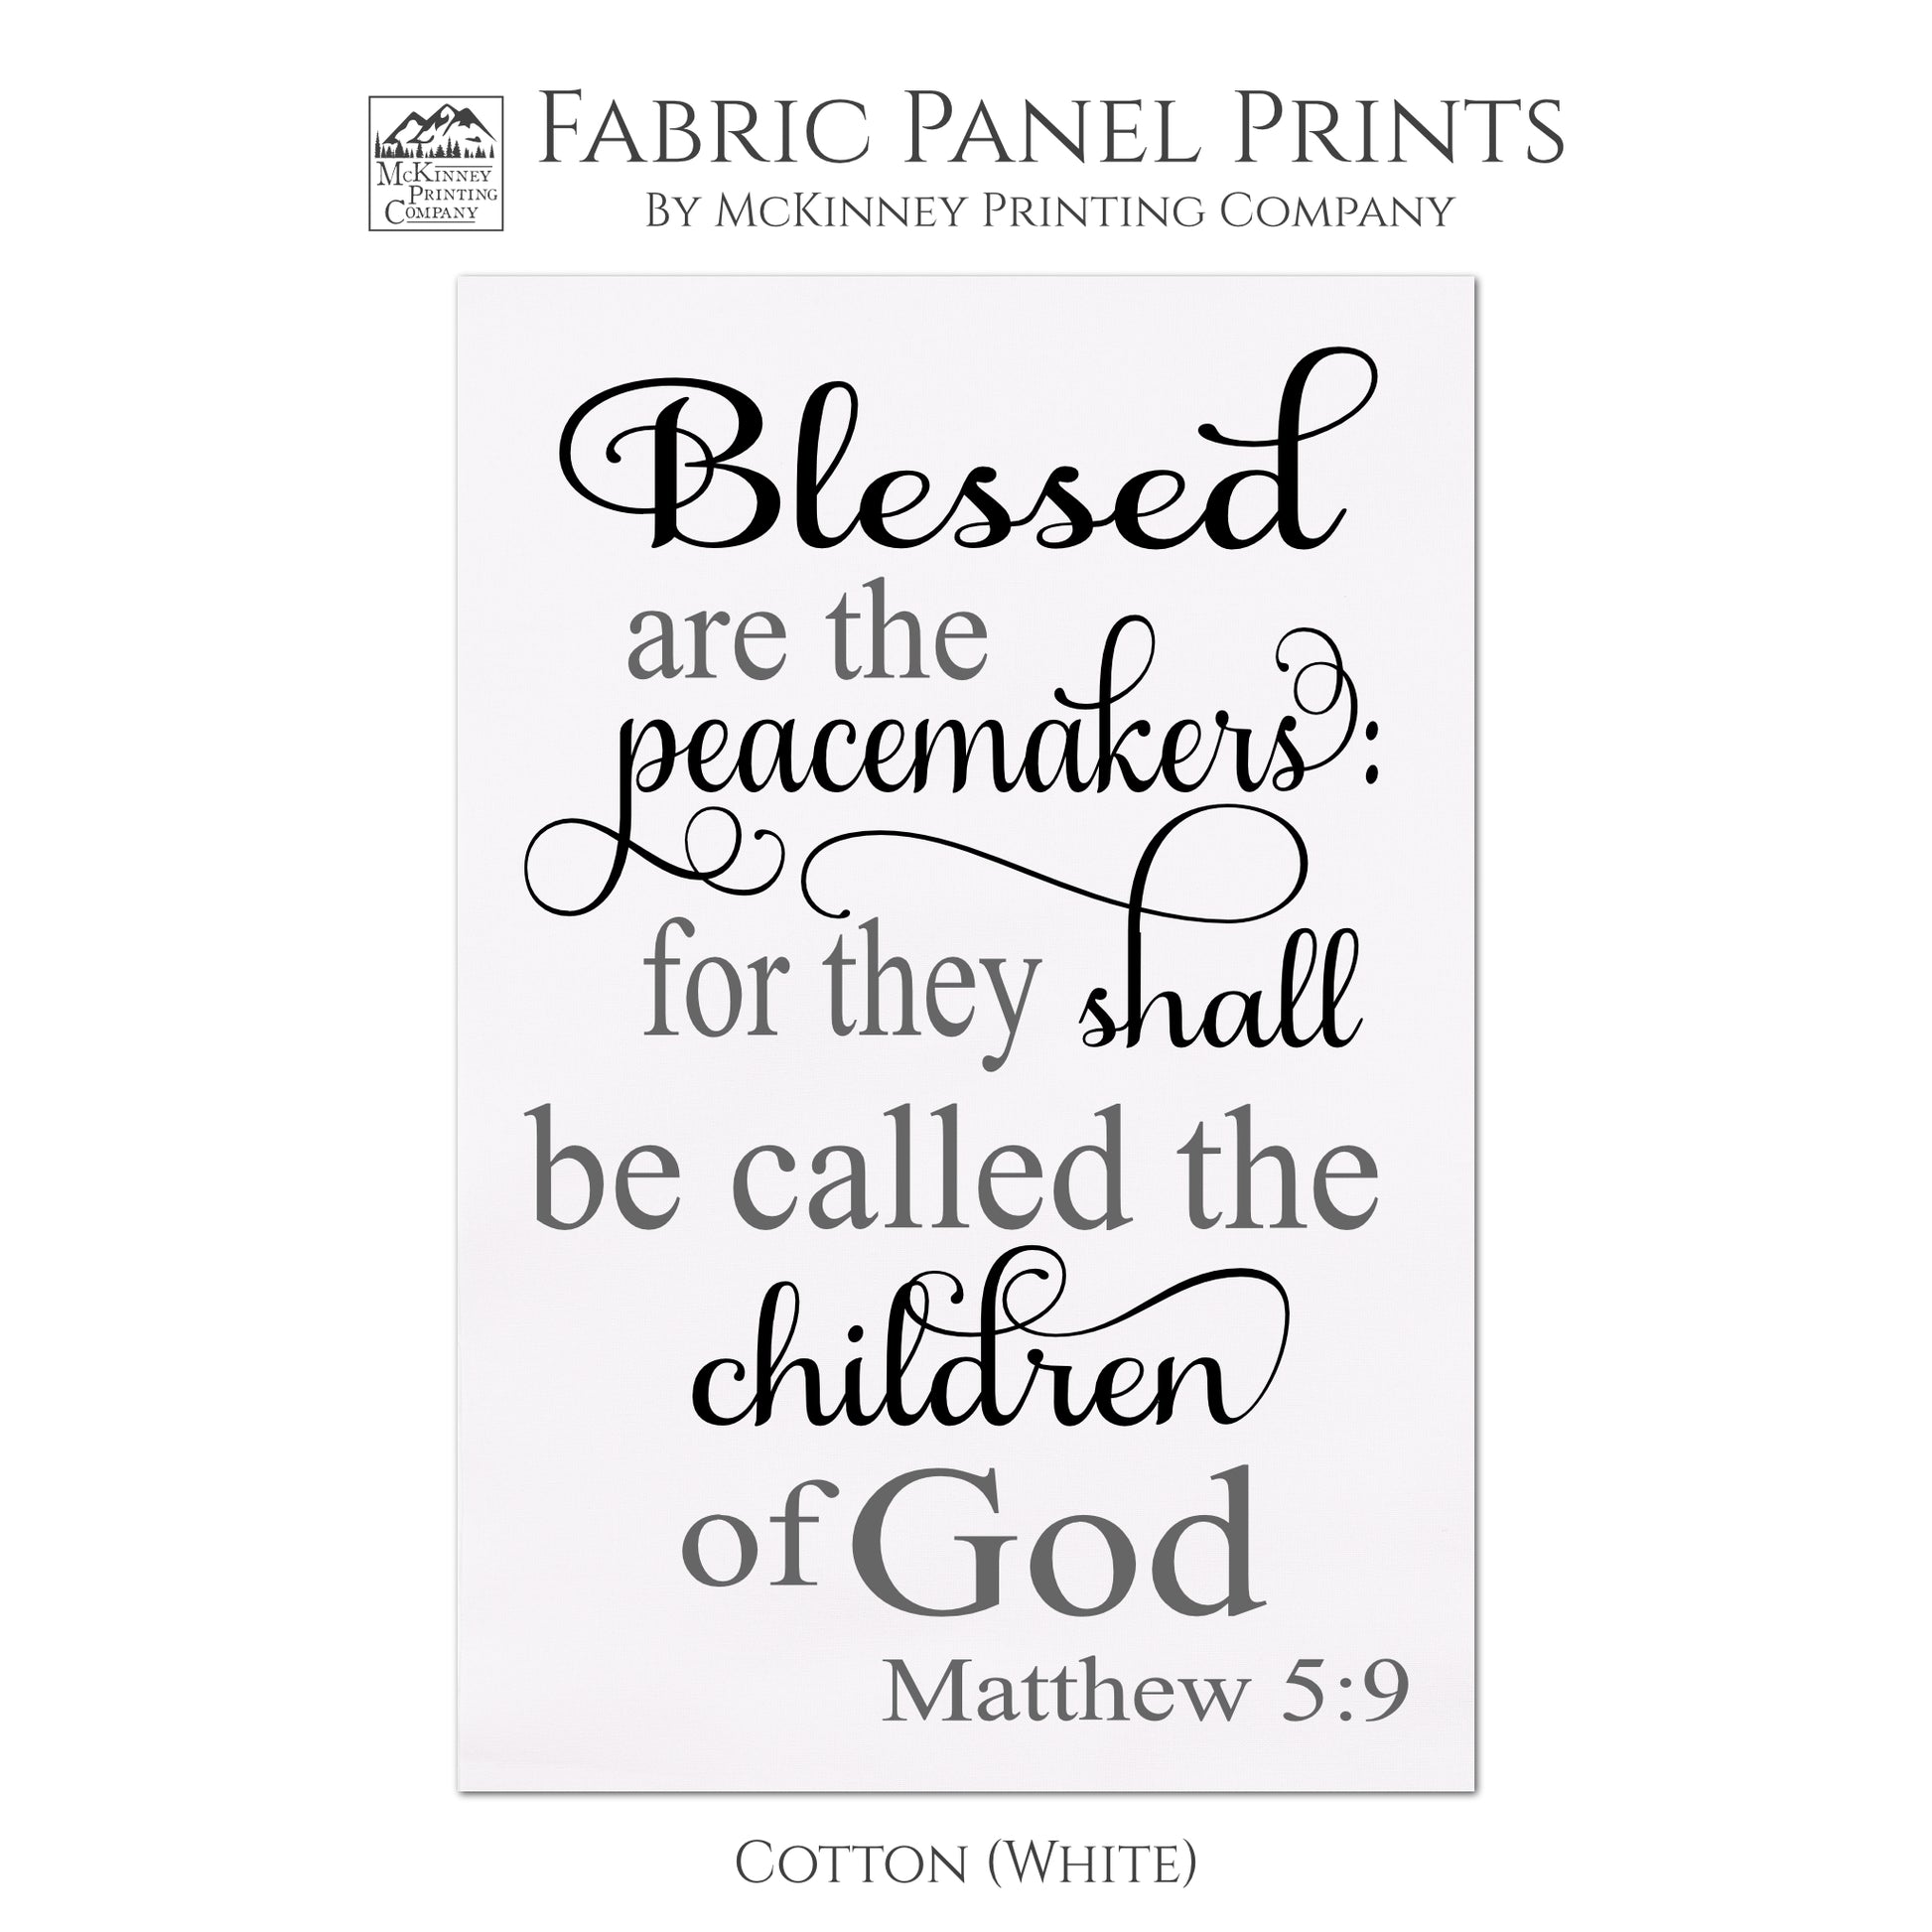 Blessed are the peacemakers: for they shall be called the children of God. - Matthew 5 9, Scripture Fabric, Quilt Block, Religious Fabric - Cotton, White